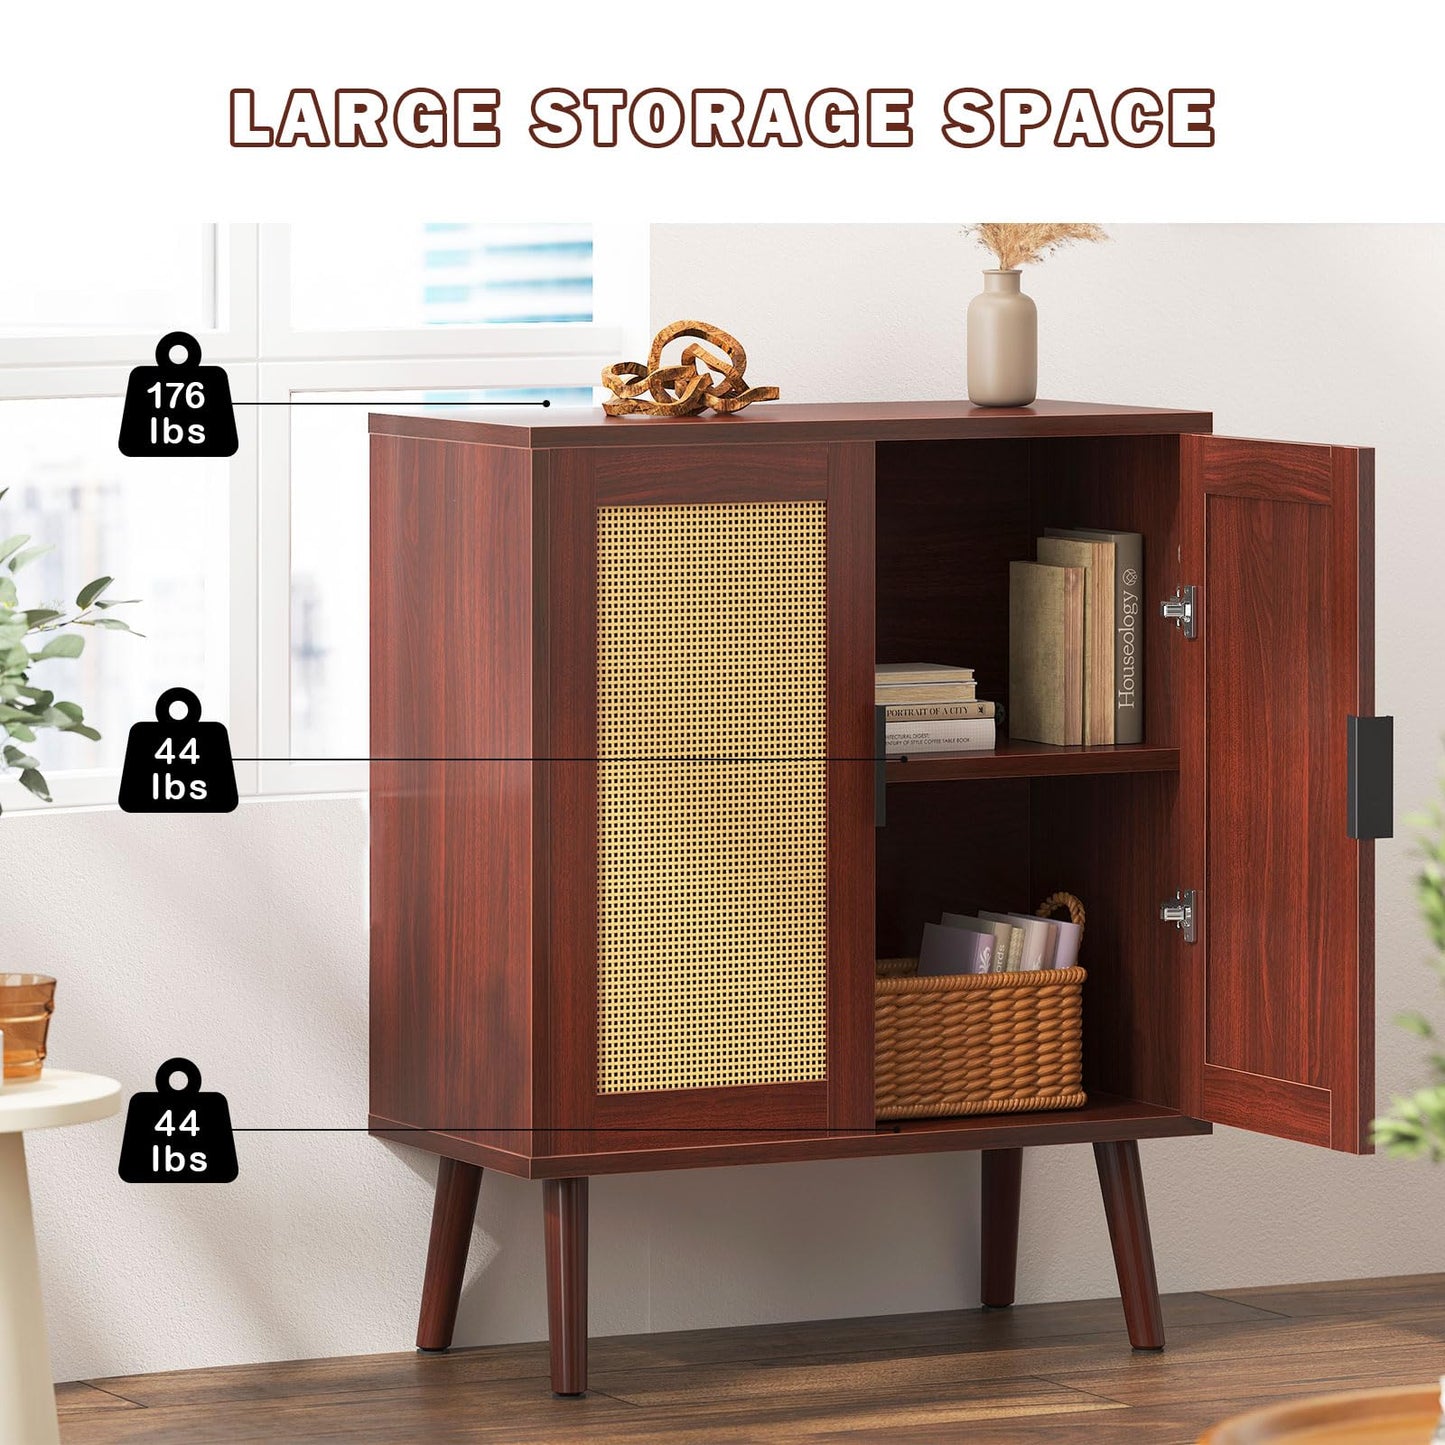 SogesHome Rattan 2-Tier Home Storage Cabinet, Accent Kitchen Cabinet with Door, Natural Sideboard with 2-Inner Storage Shelf Rattan Side Storage Cabinets for Bedroom, Kitchen, Home Office, Brown